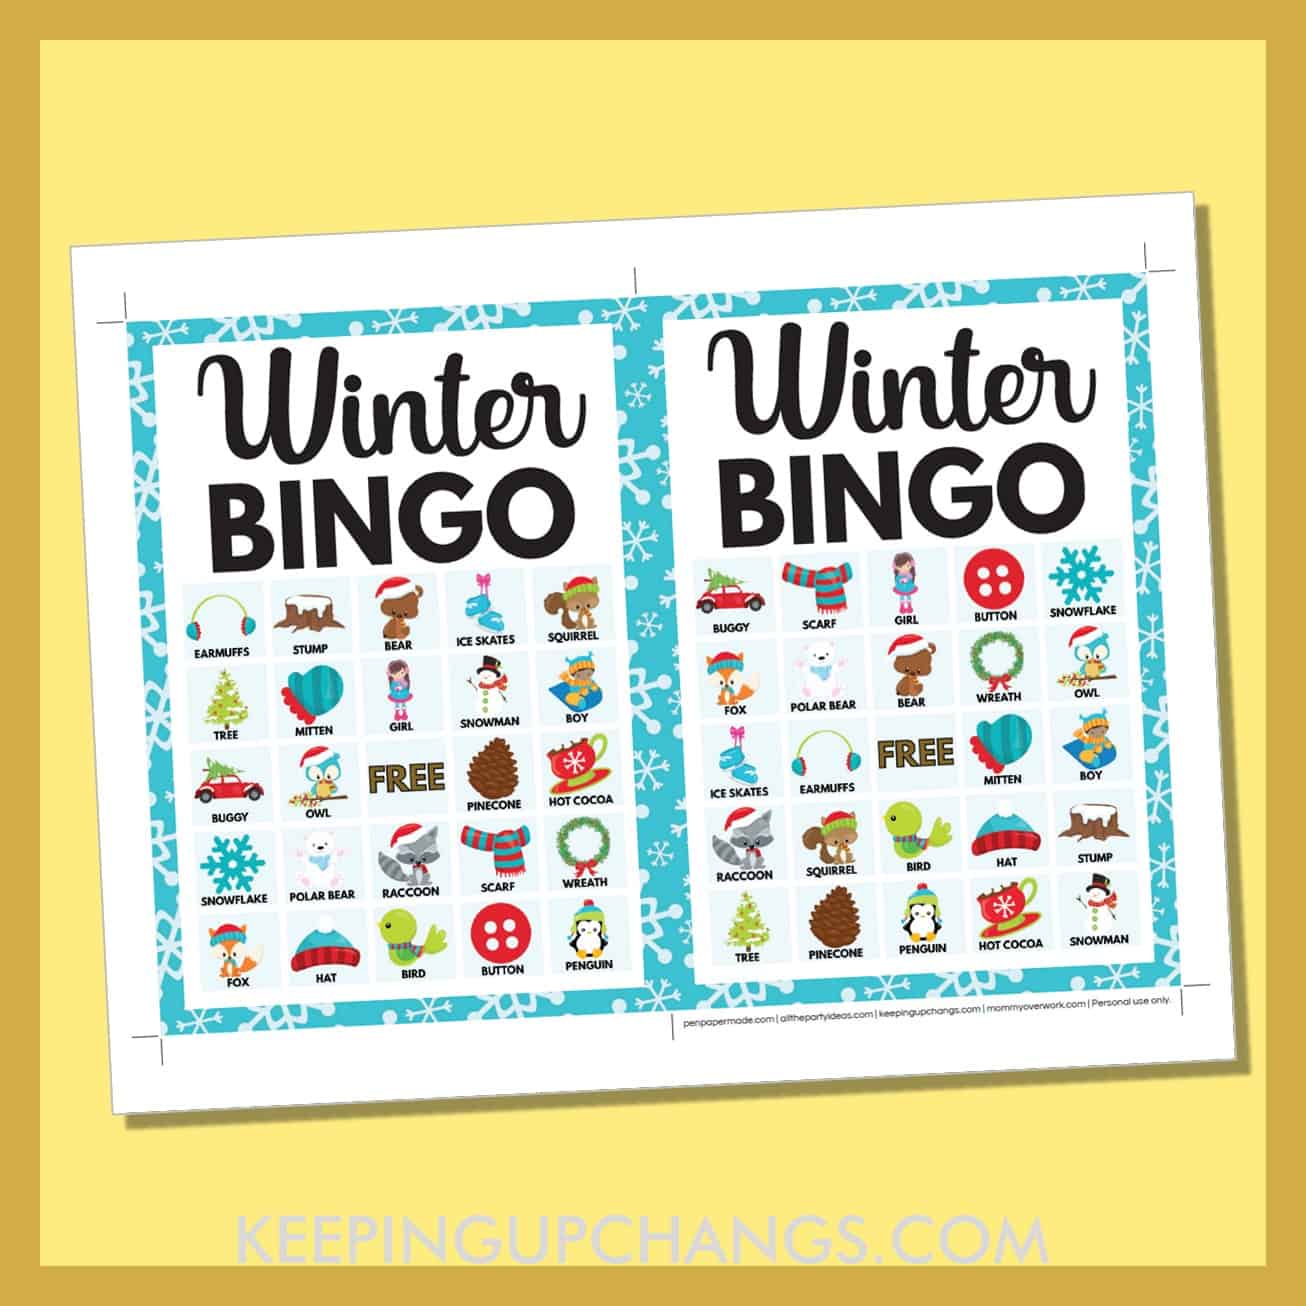 free winter bingo card 5x5 5x7 game boards with images and text words.